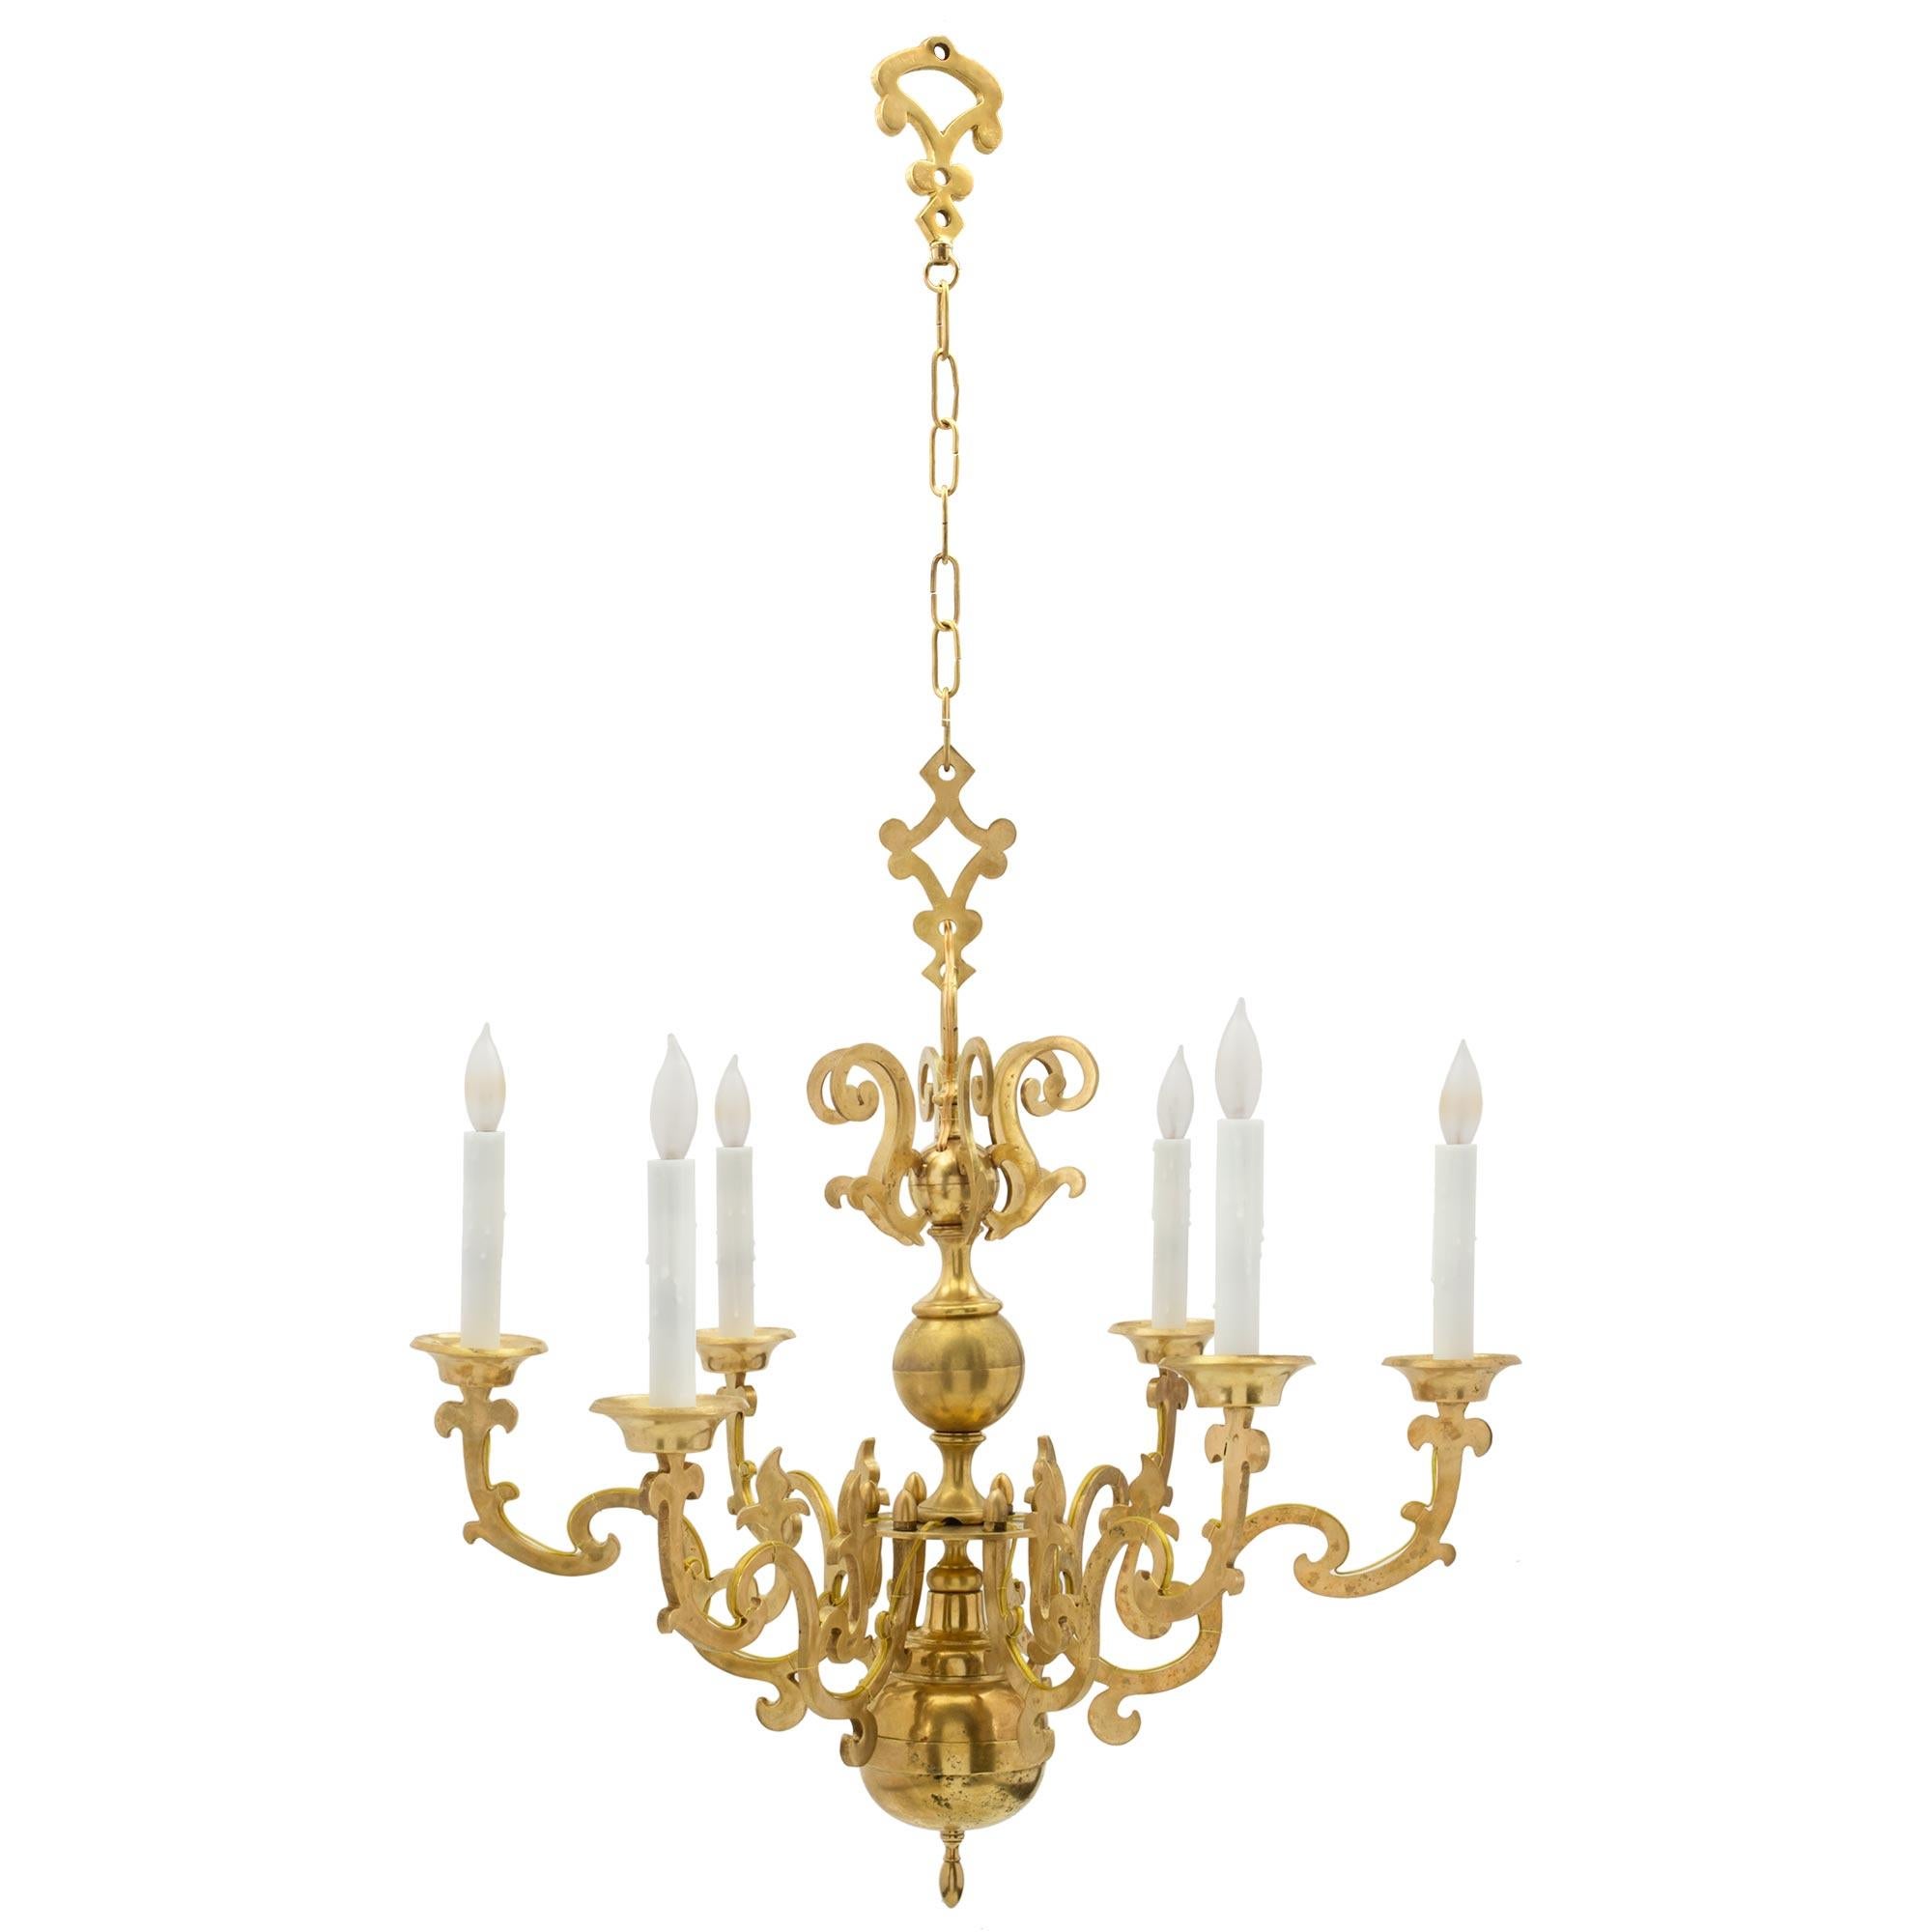 A beautiful Dutch 19th century ormolu six arm chandelier. The chandelier is centered by a fine finial below the circular central base. Each arm displays most decorative scrolled designs while the central fut displays a circular element with scrolled